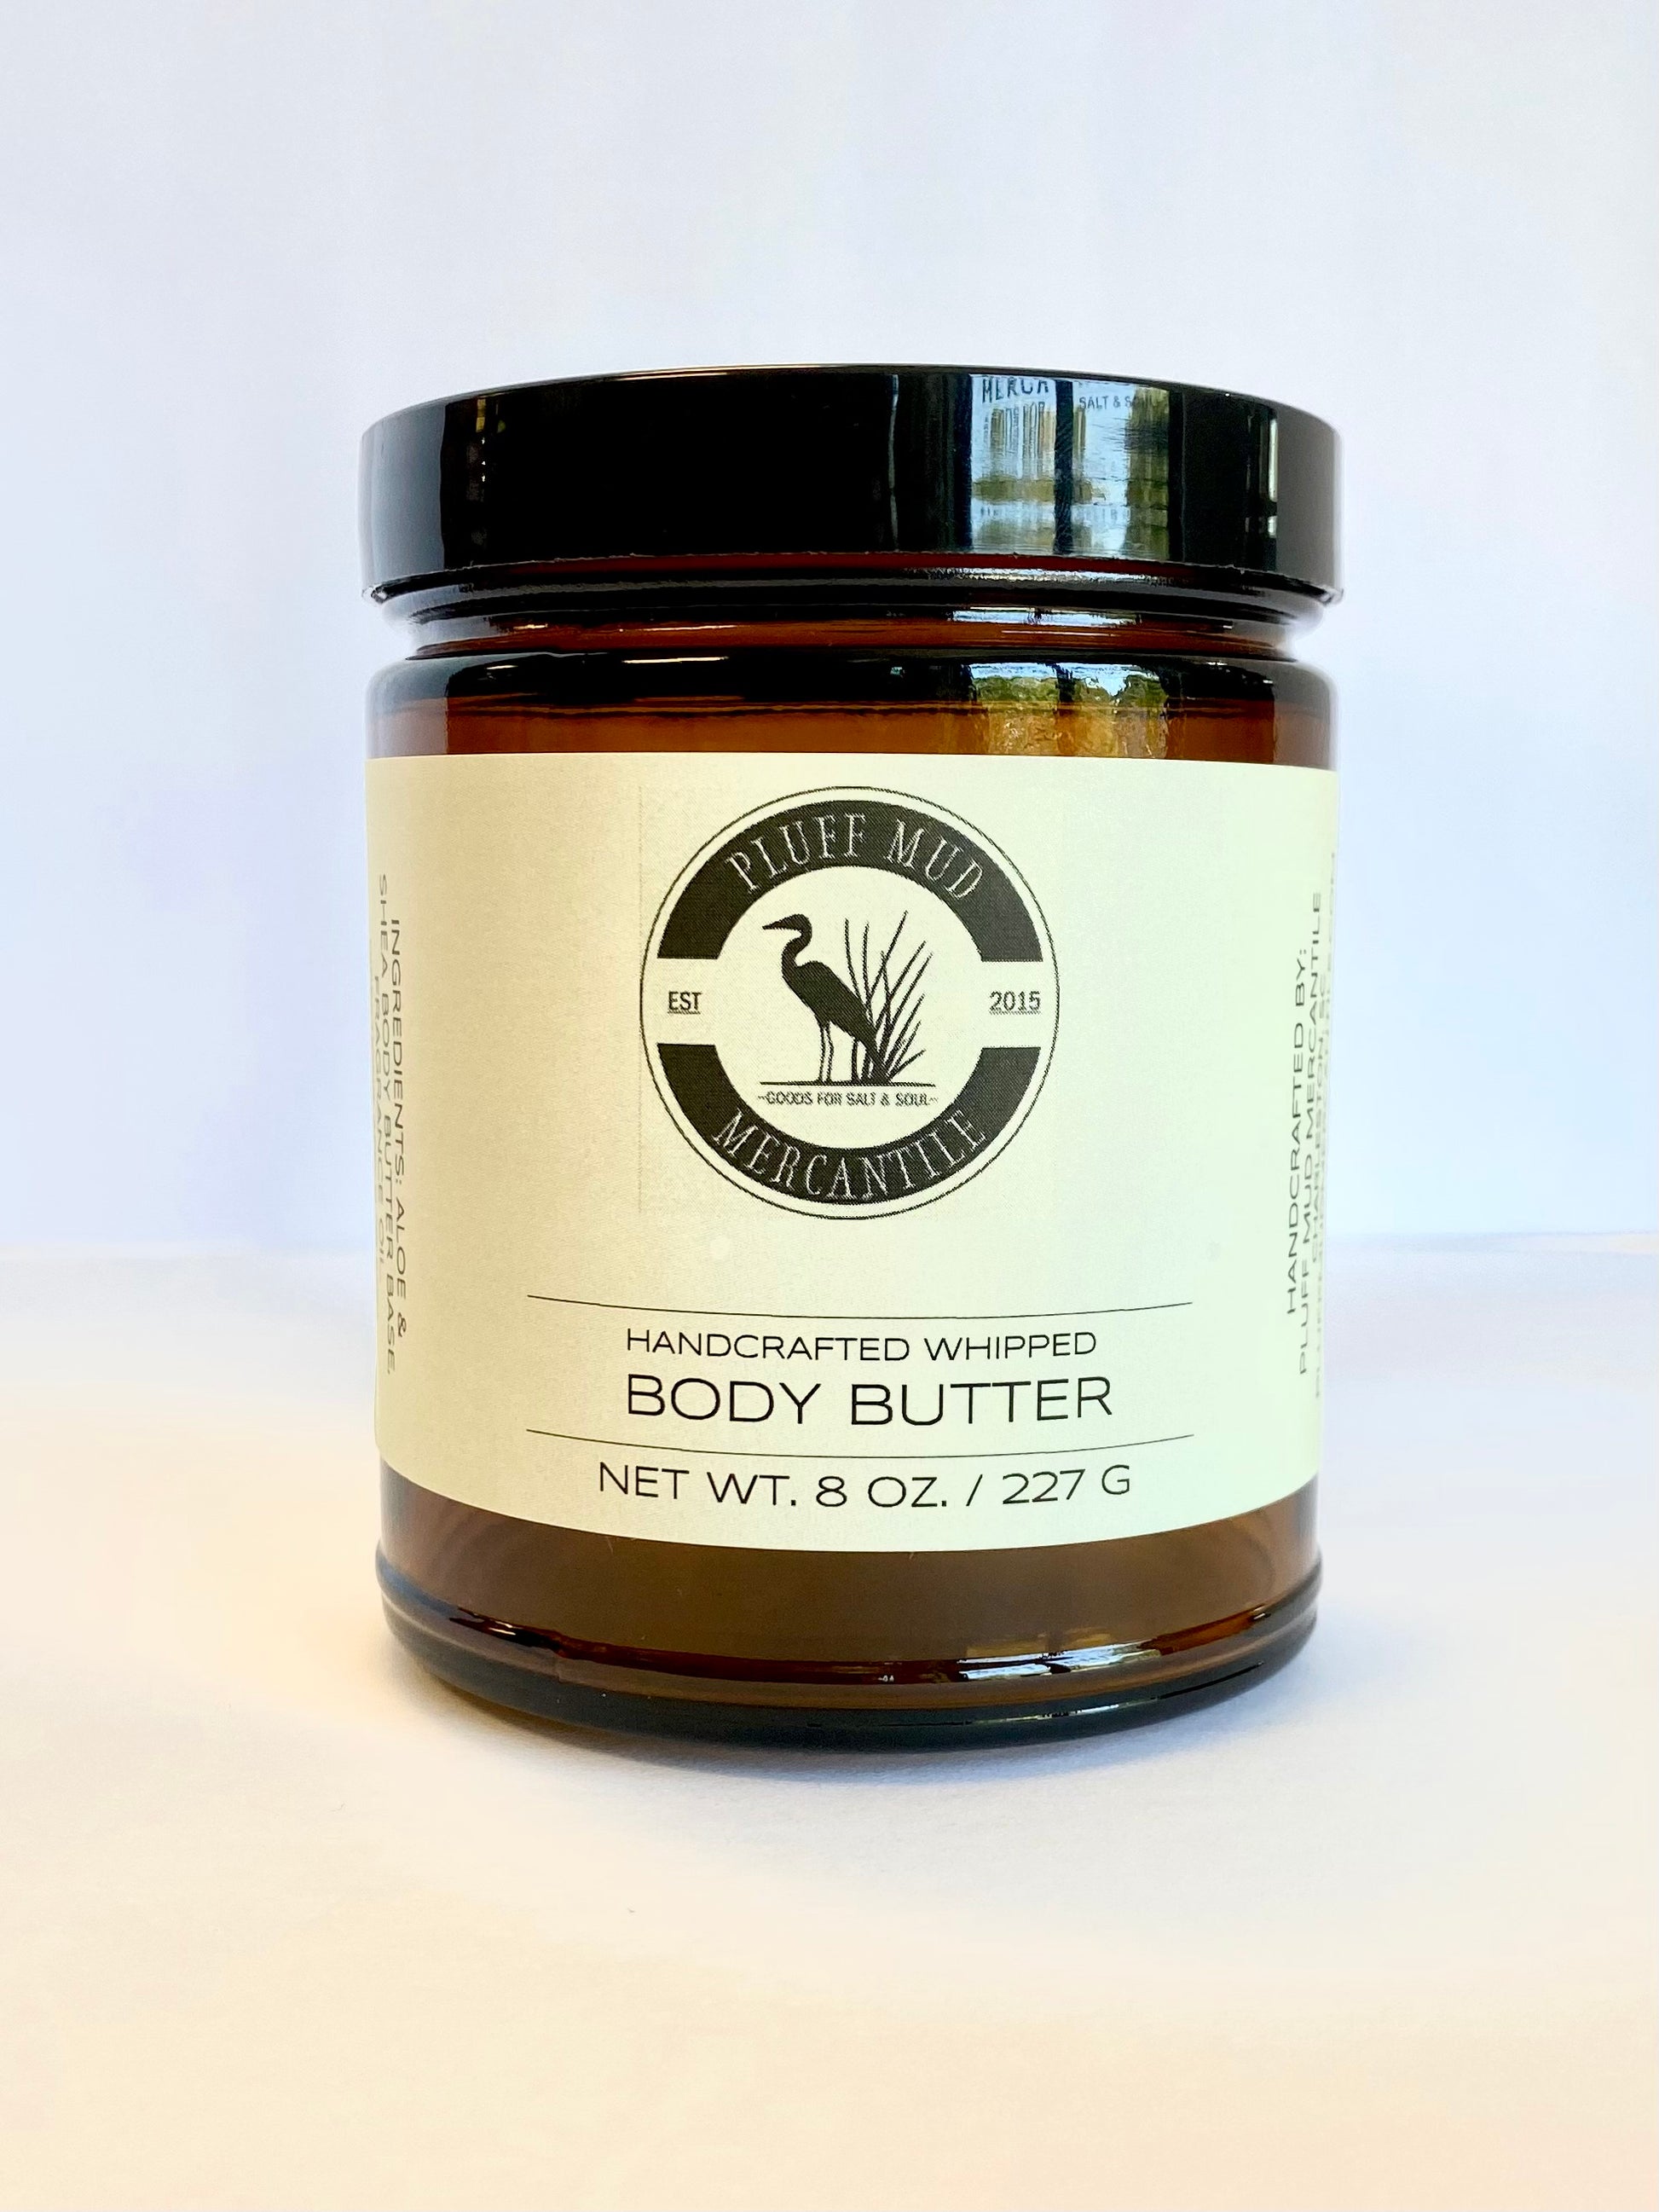 Whipped Body Butter - Pluff Mud - Pluff Mud Mercantile